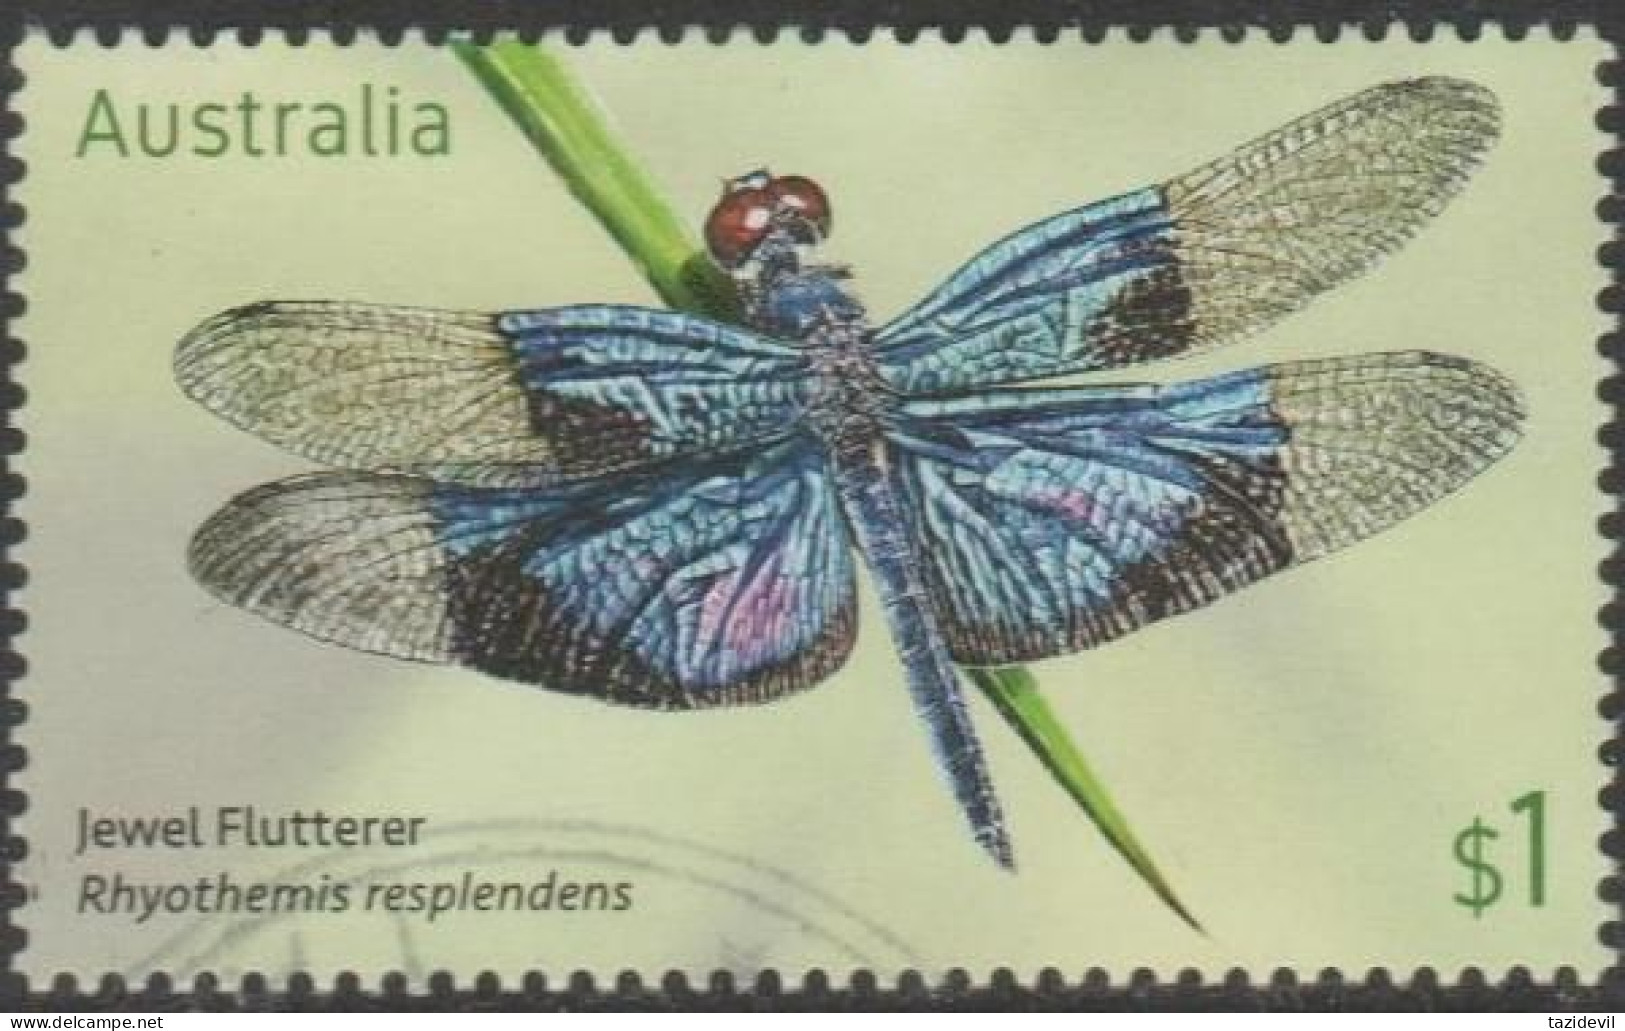 AUSTRALIA - USED 2017 $1.00 Stamp Collecting Month: Dragonflies - Jewel Flutterer - Used Stamps